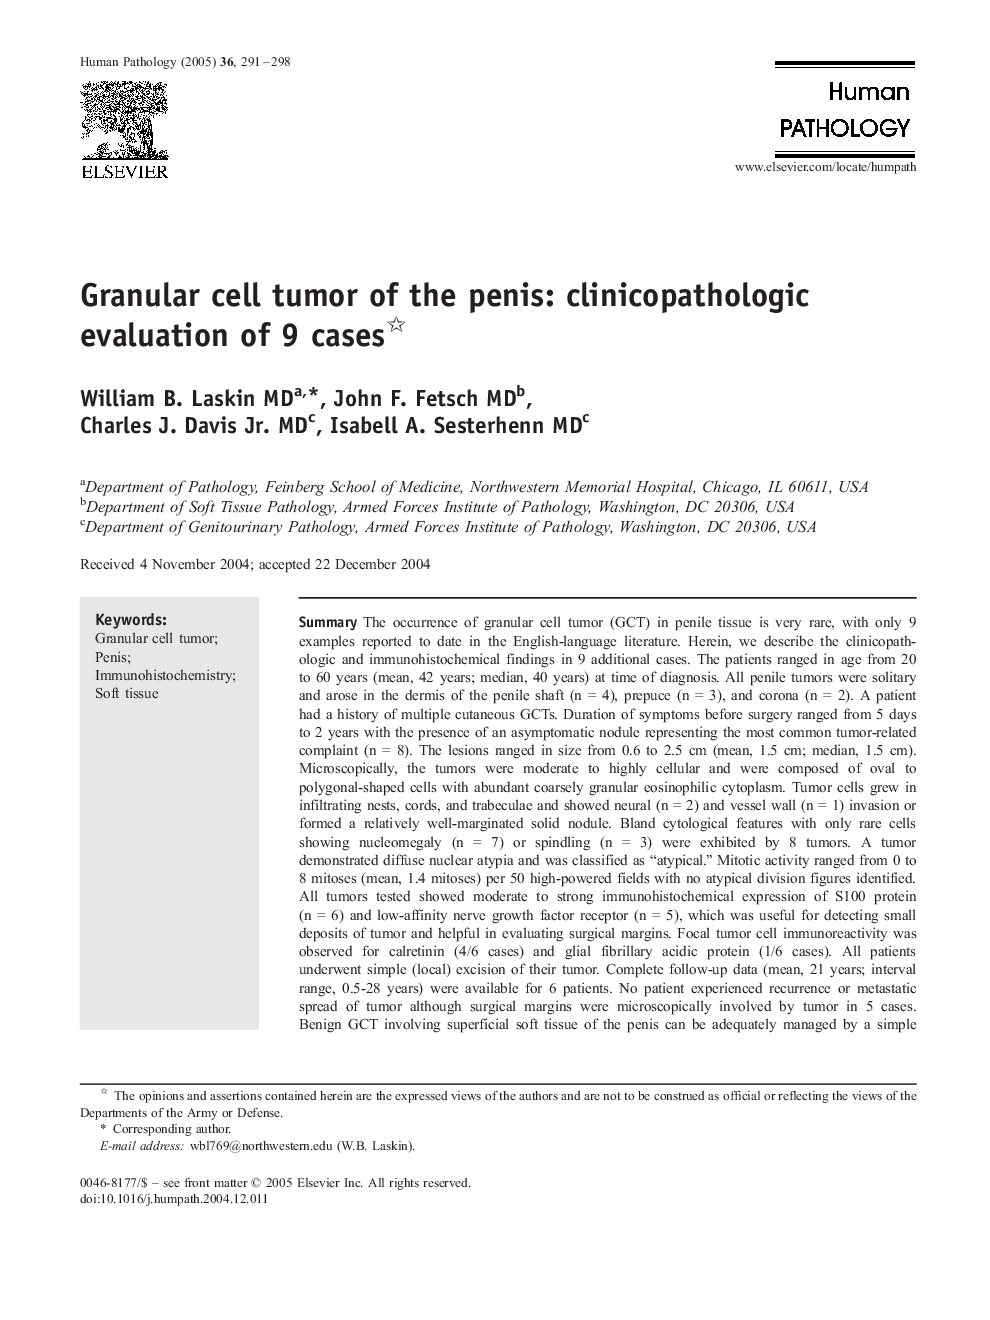 Granular cell tumor of the penis: clinicopathologic evaluation of 9 cases